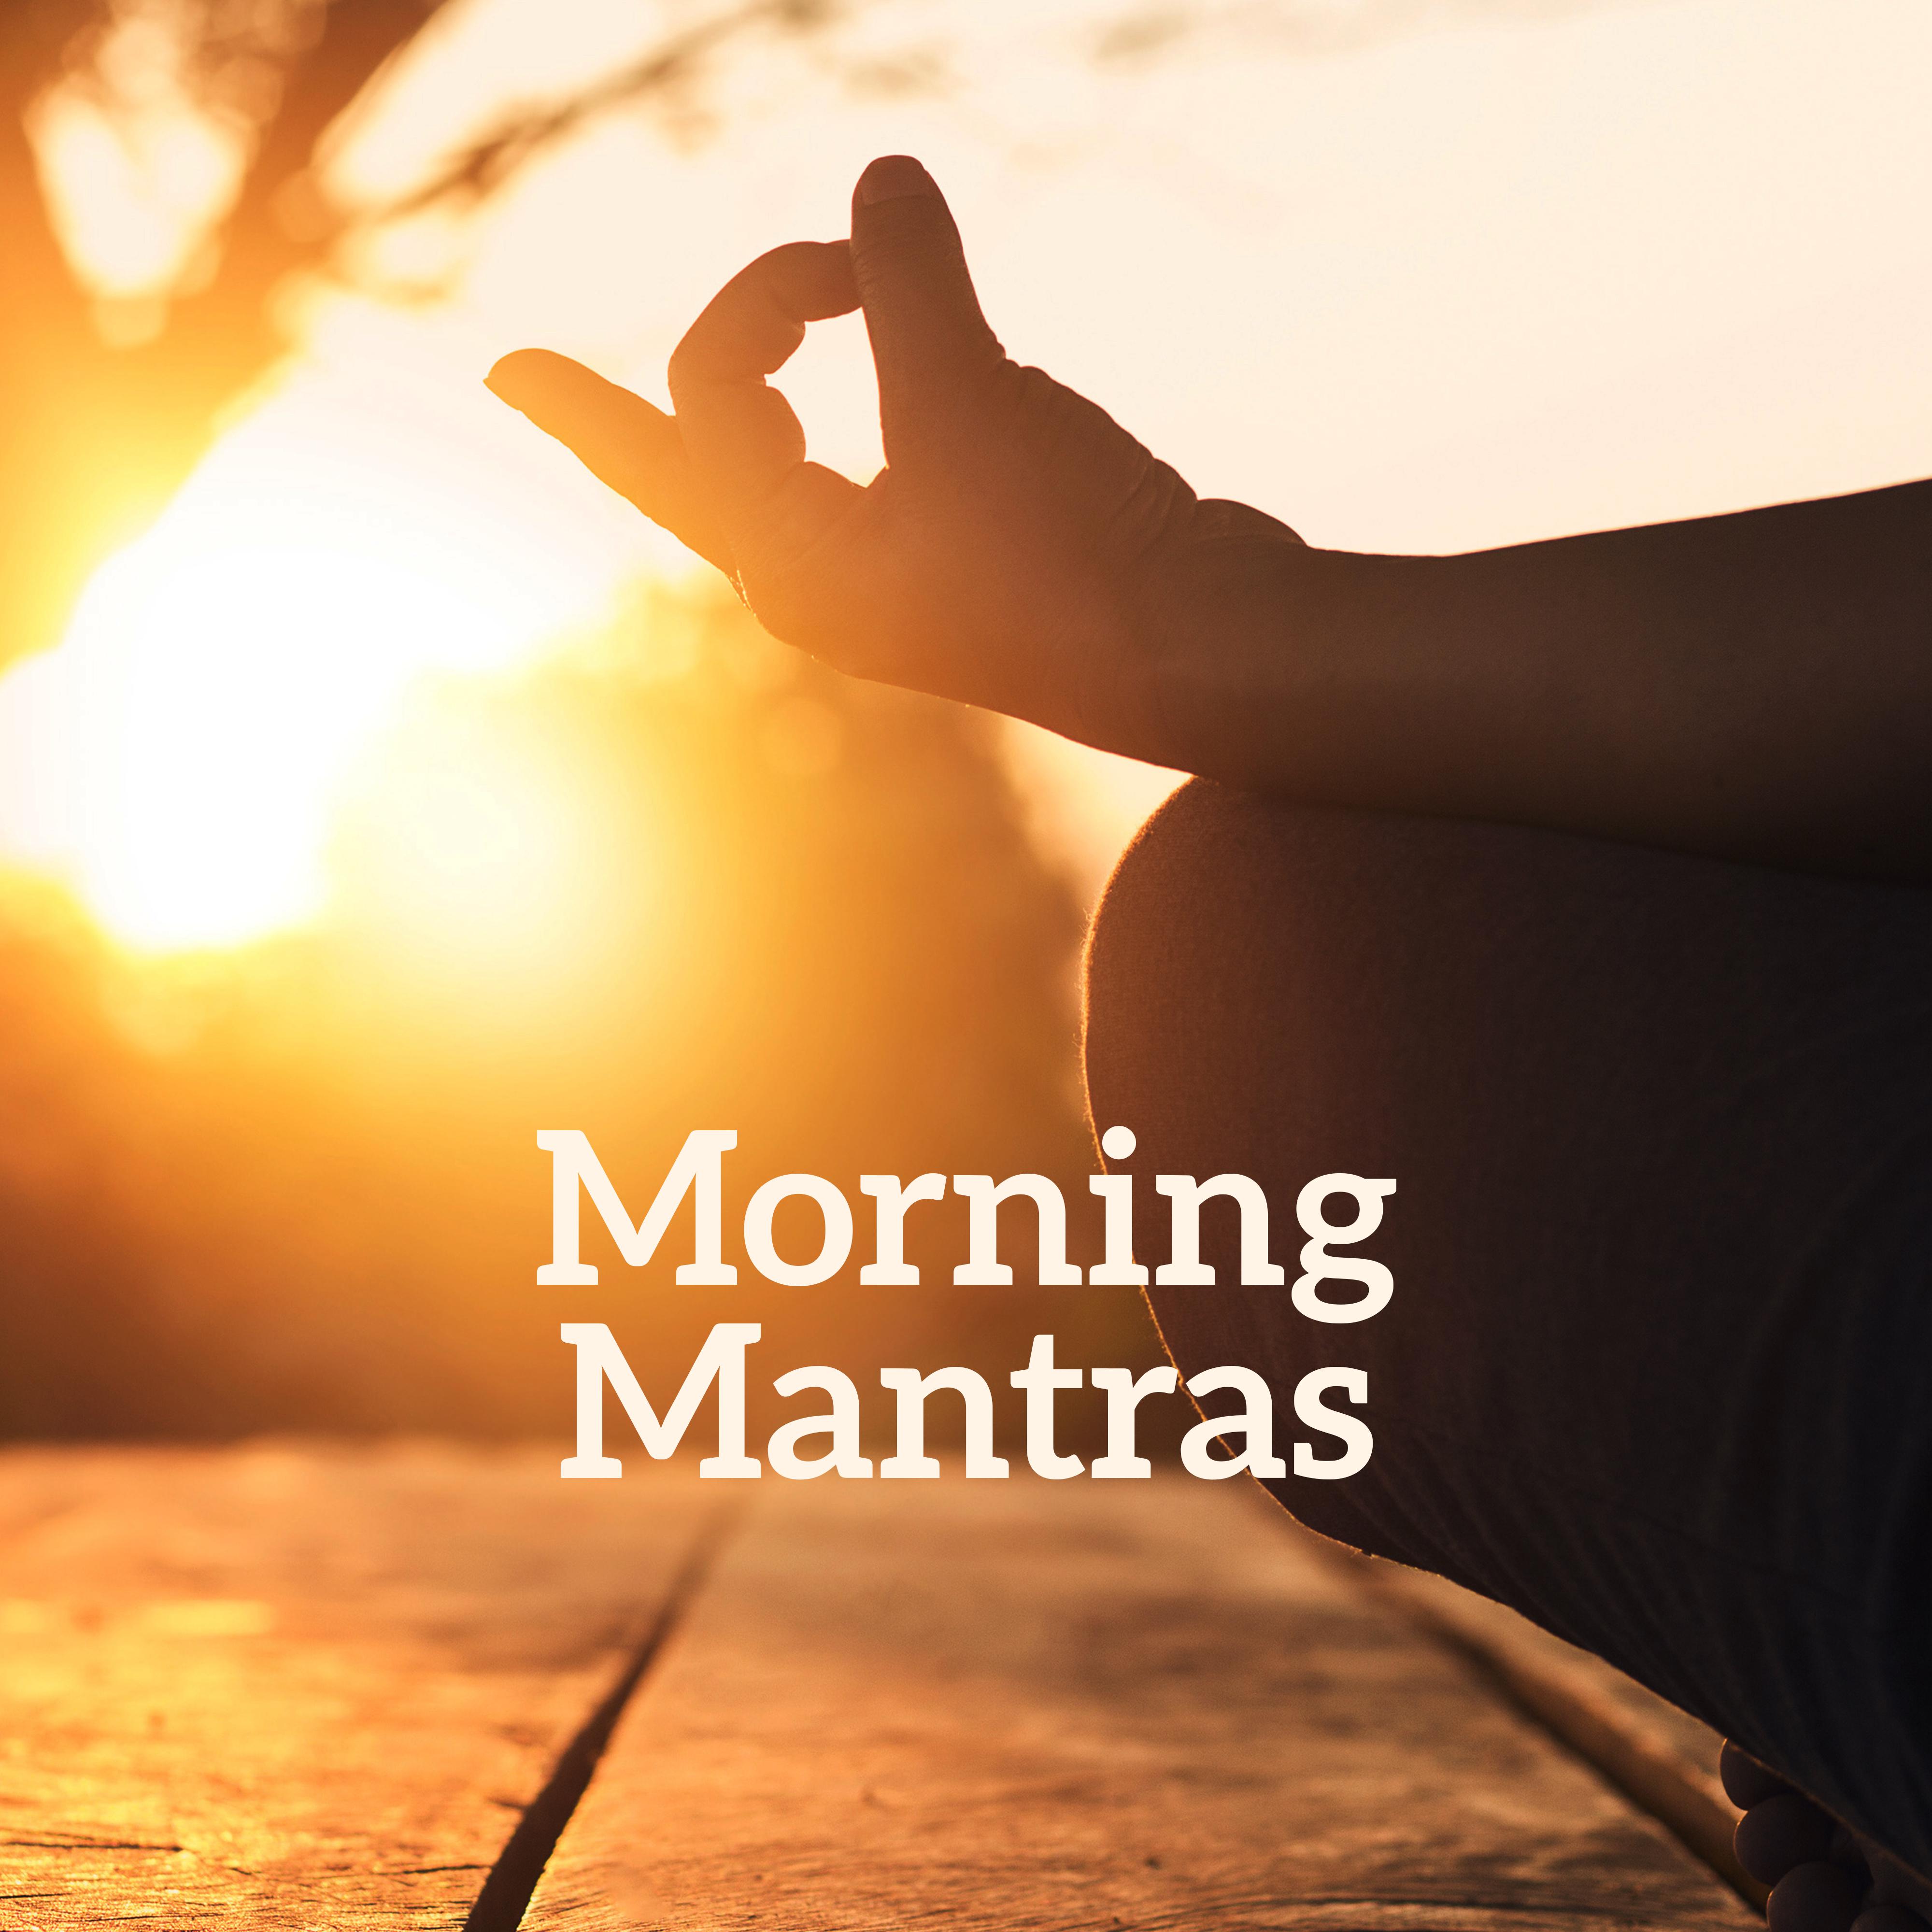 Morning Mantras: Meditation Relax, Ambient Yoga, Peaceful Meditation for Relaxation, Inner Harmony, Calming Meditation Mix, New Age Mantra, Deep Meditation, Lounge